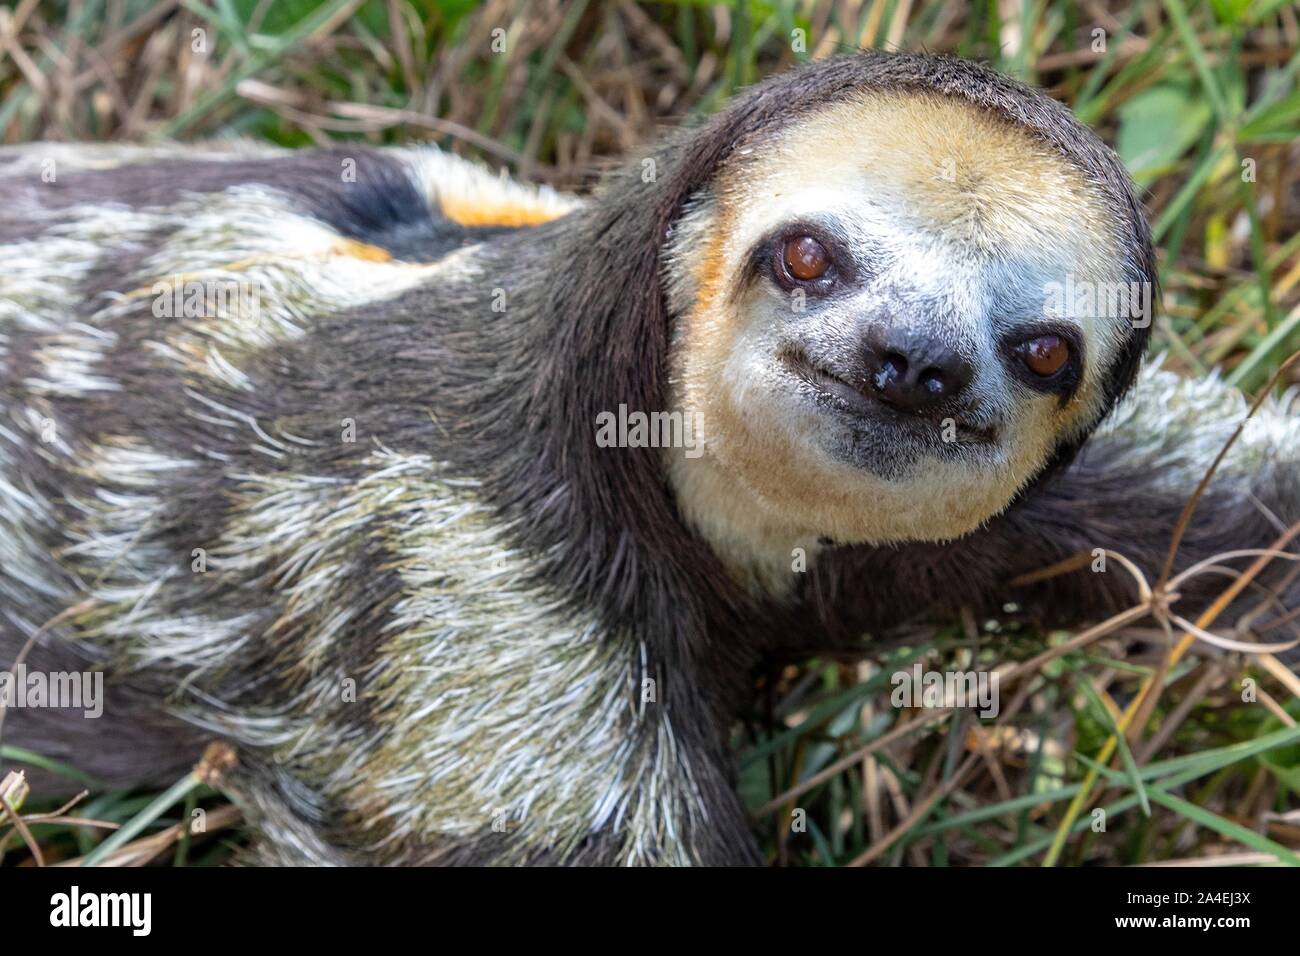 THREE-TOED SLOTH OR PALE-THROATED SLOTH, THE SLOWEST ANIMAL IN THE FOREST,  KAW, FRENCH GUIANA, OVERSEAS DEPARTMENT, SOUTH AMERICA, FRANCE Stock Photo  - Alamy